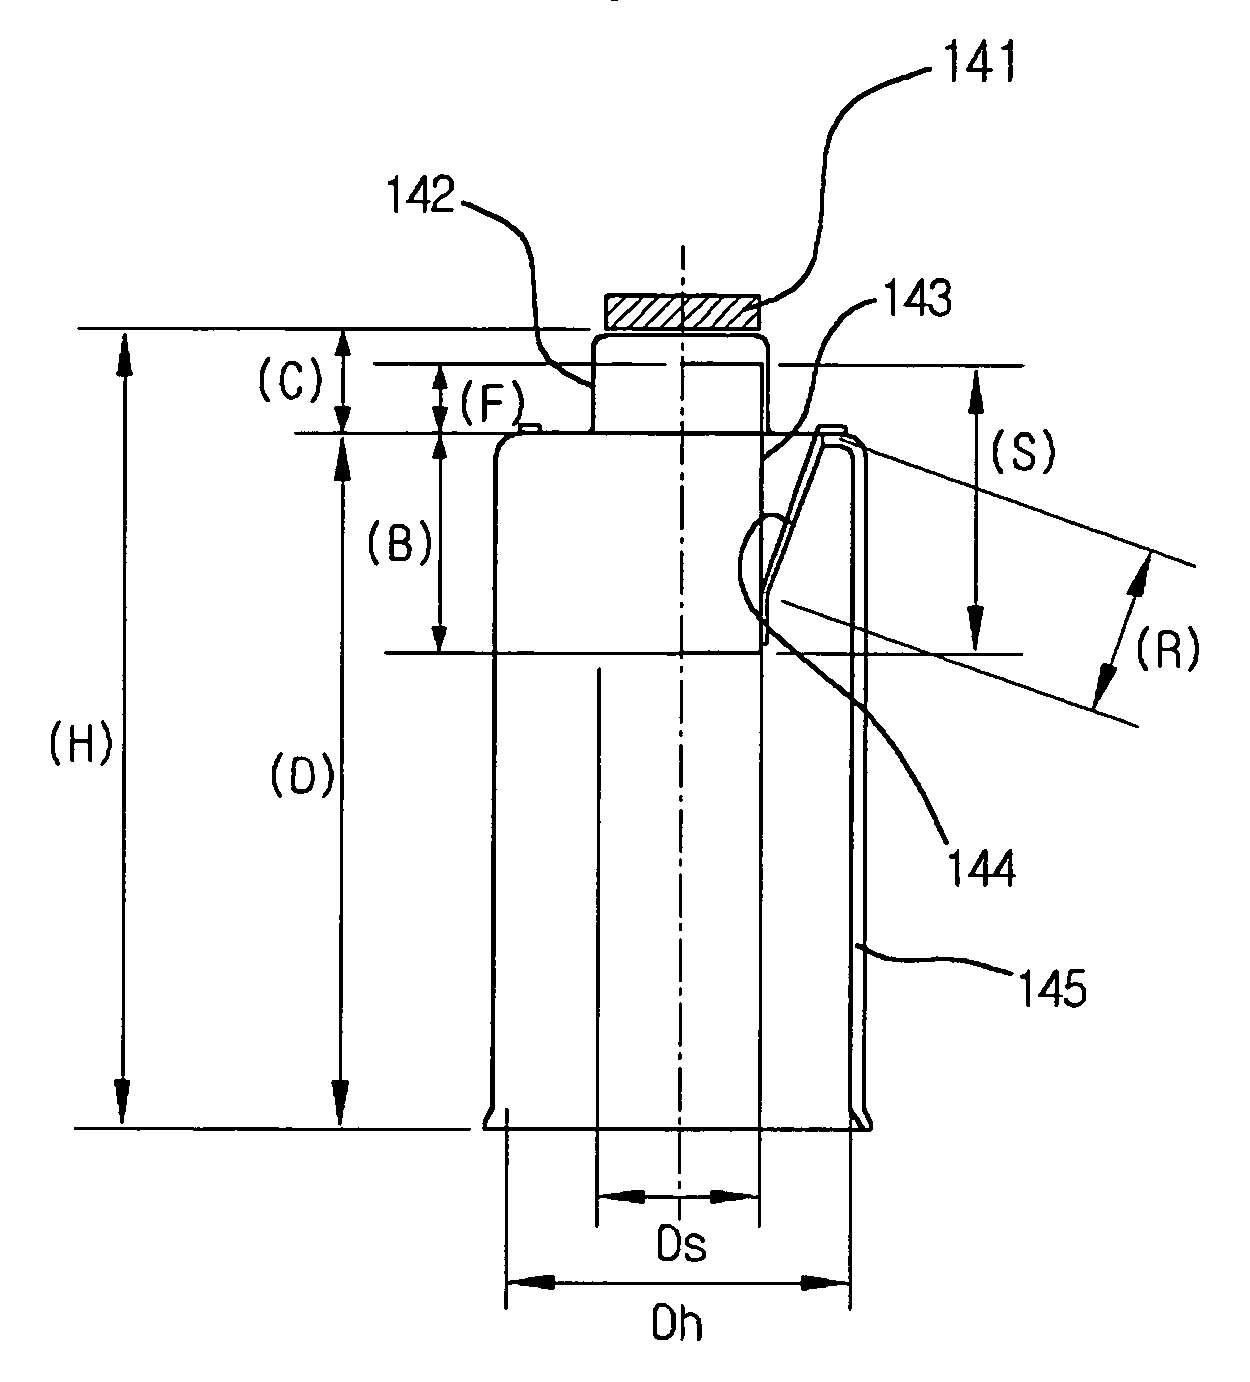 Cathode structure for color cathode ray tube